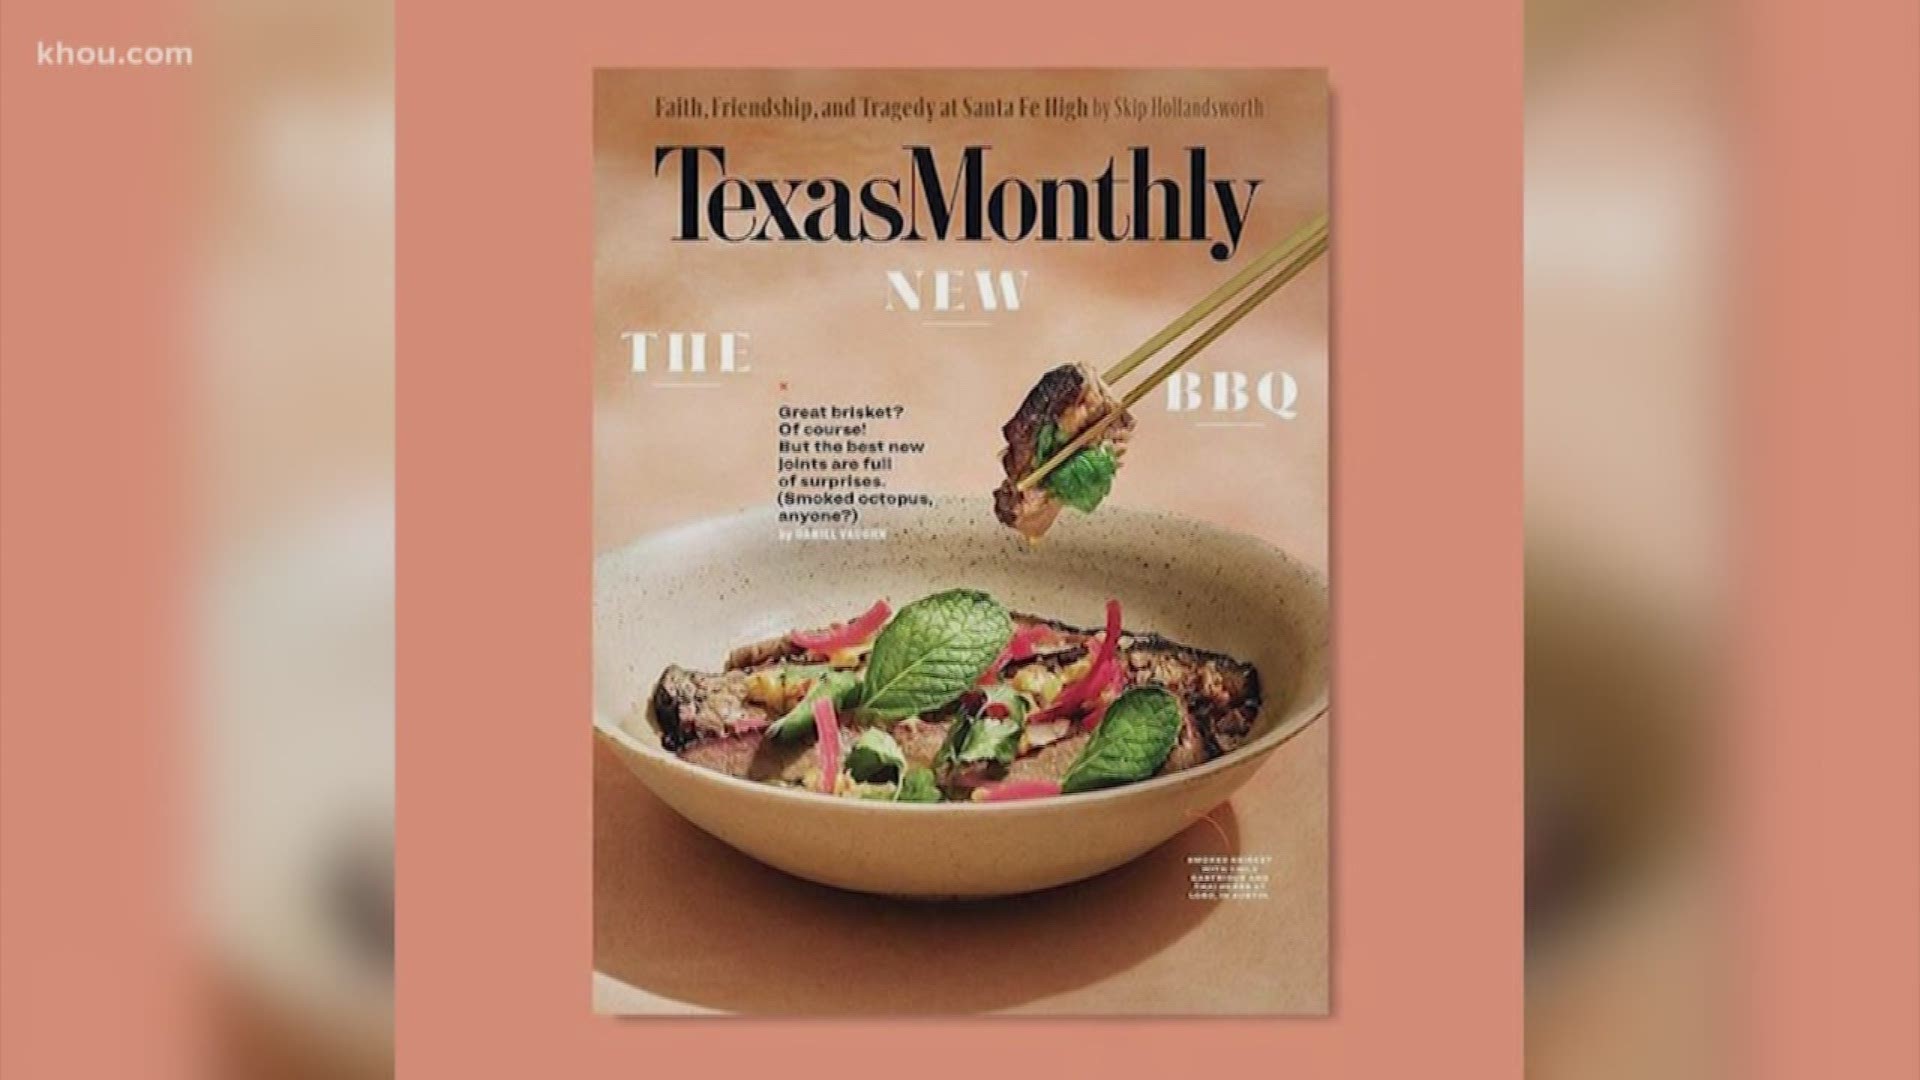 Texas Monthly is out with its list of the 25 best new BBQ joints in the state and Houston is well represented.